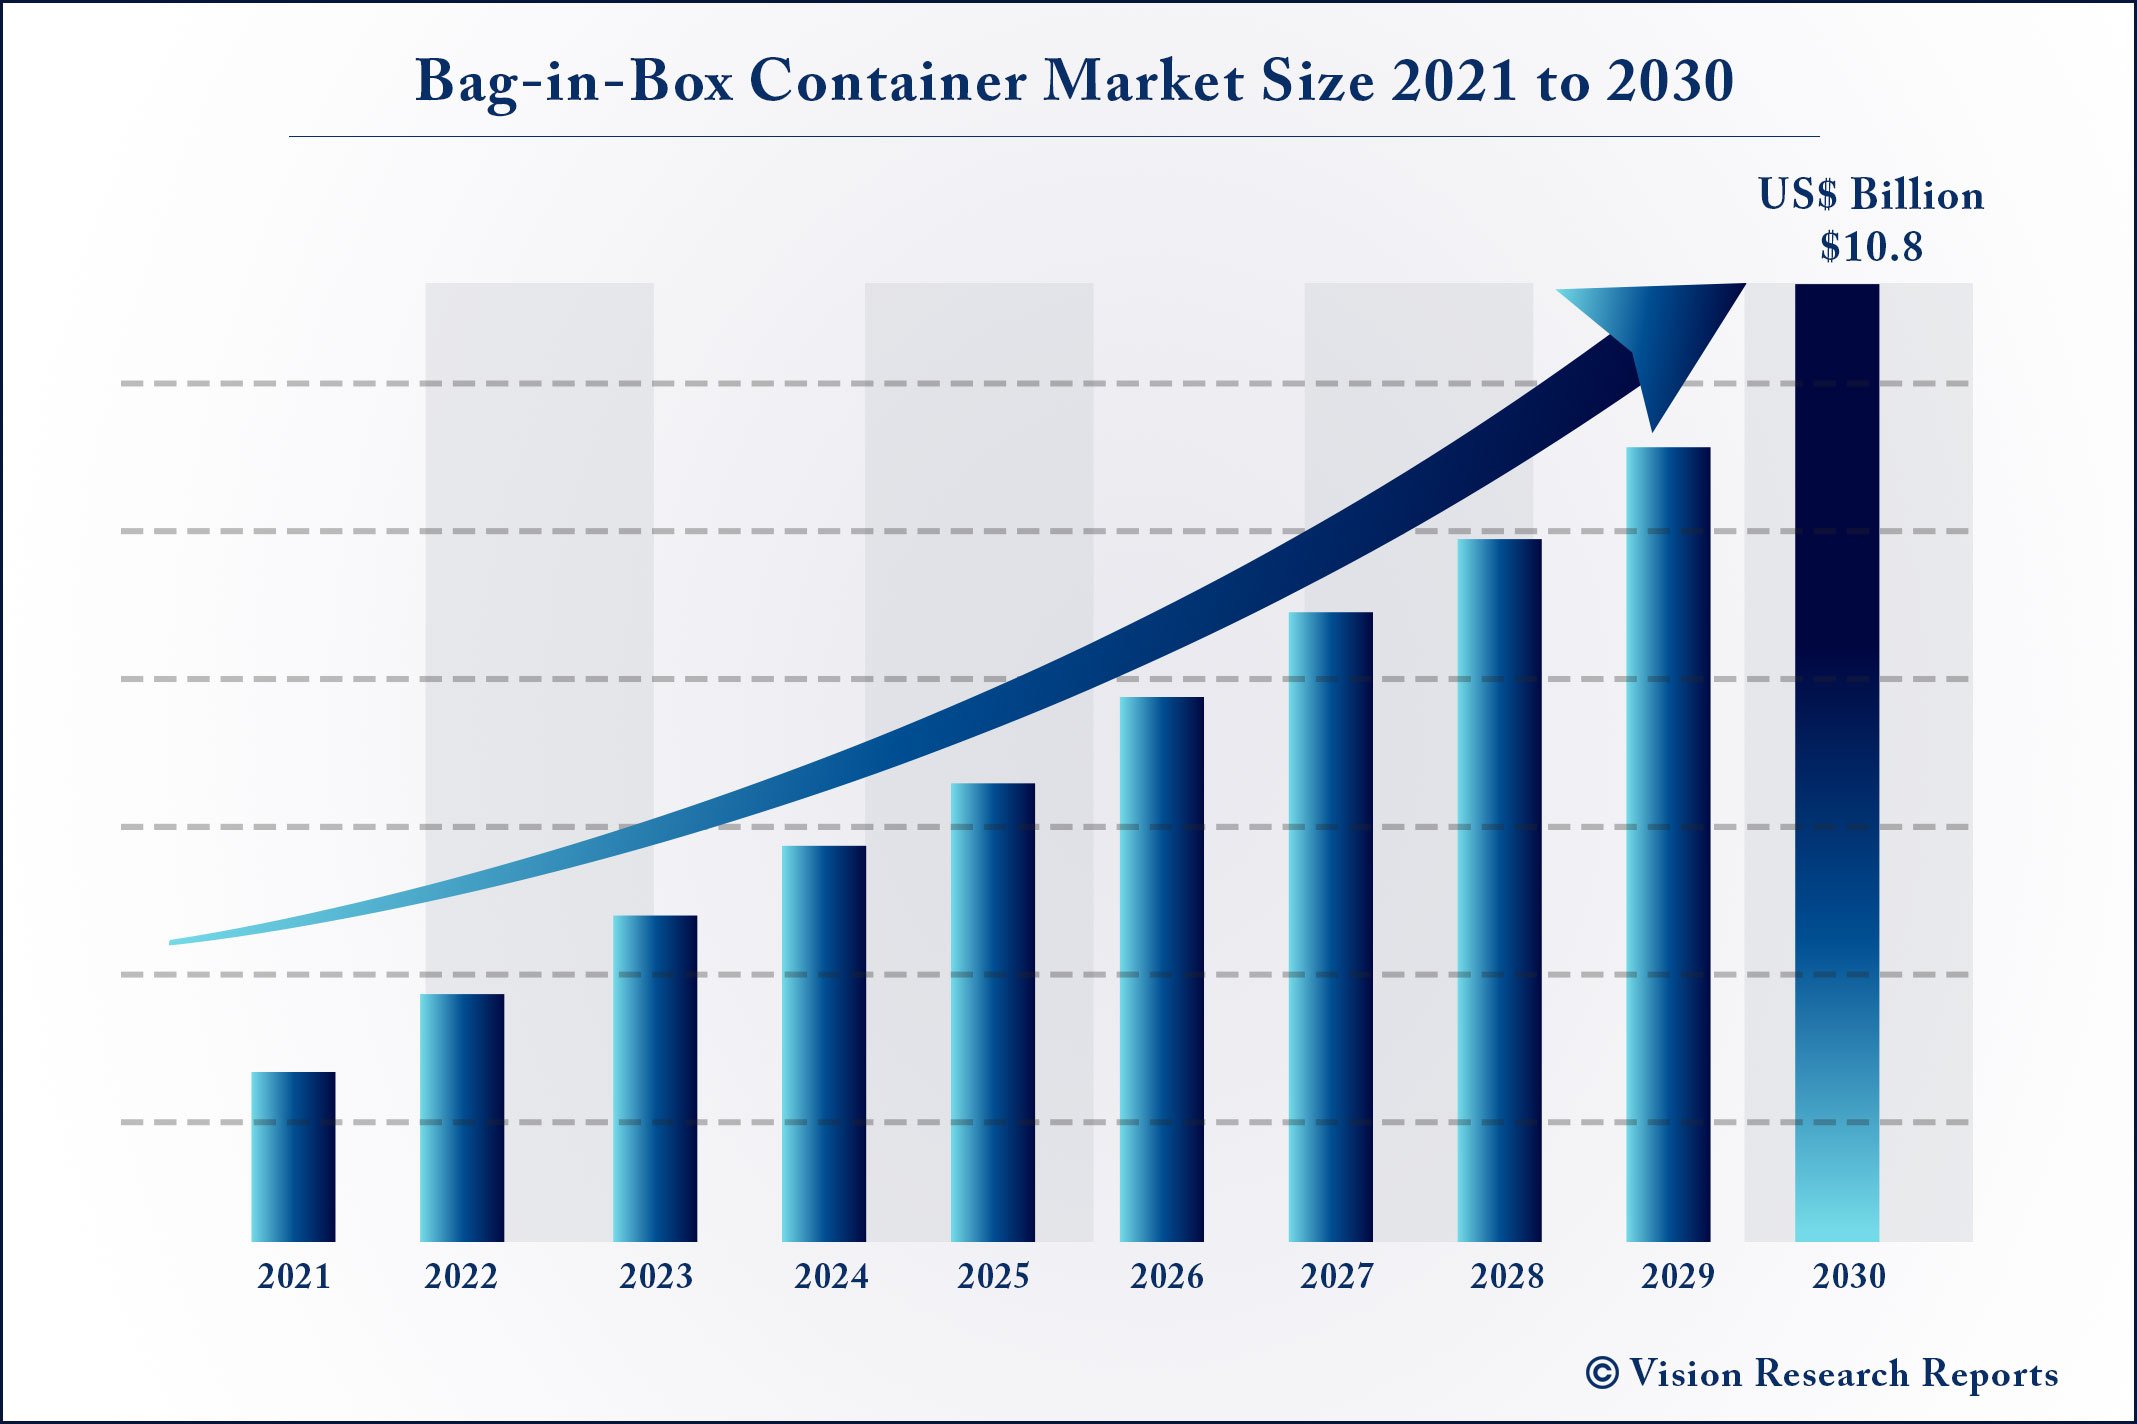 Bag-in-Box Container Market Size 2021 to 2030